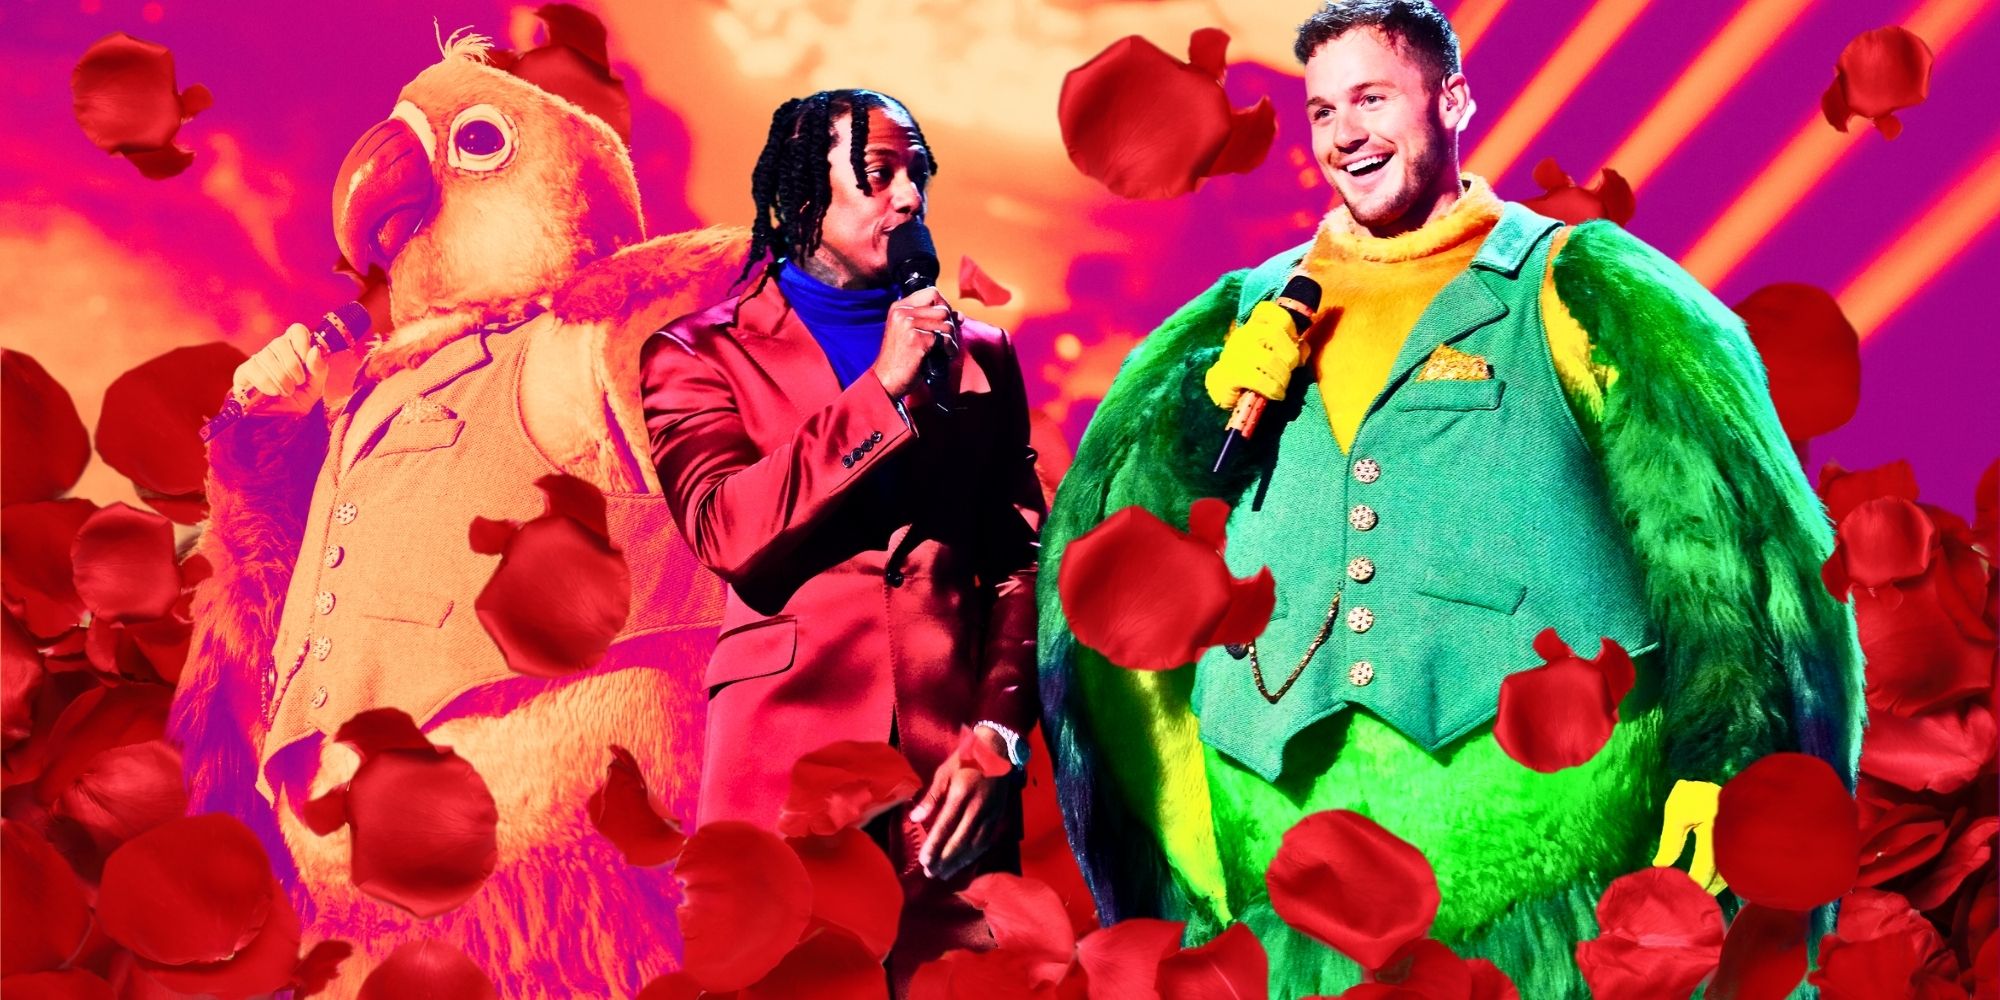 The Masked Singer's Nick Cannon and Colton Underwood wearing the Lovebird costume, surrounded by red rose petals